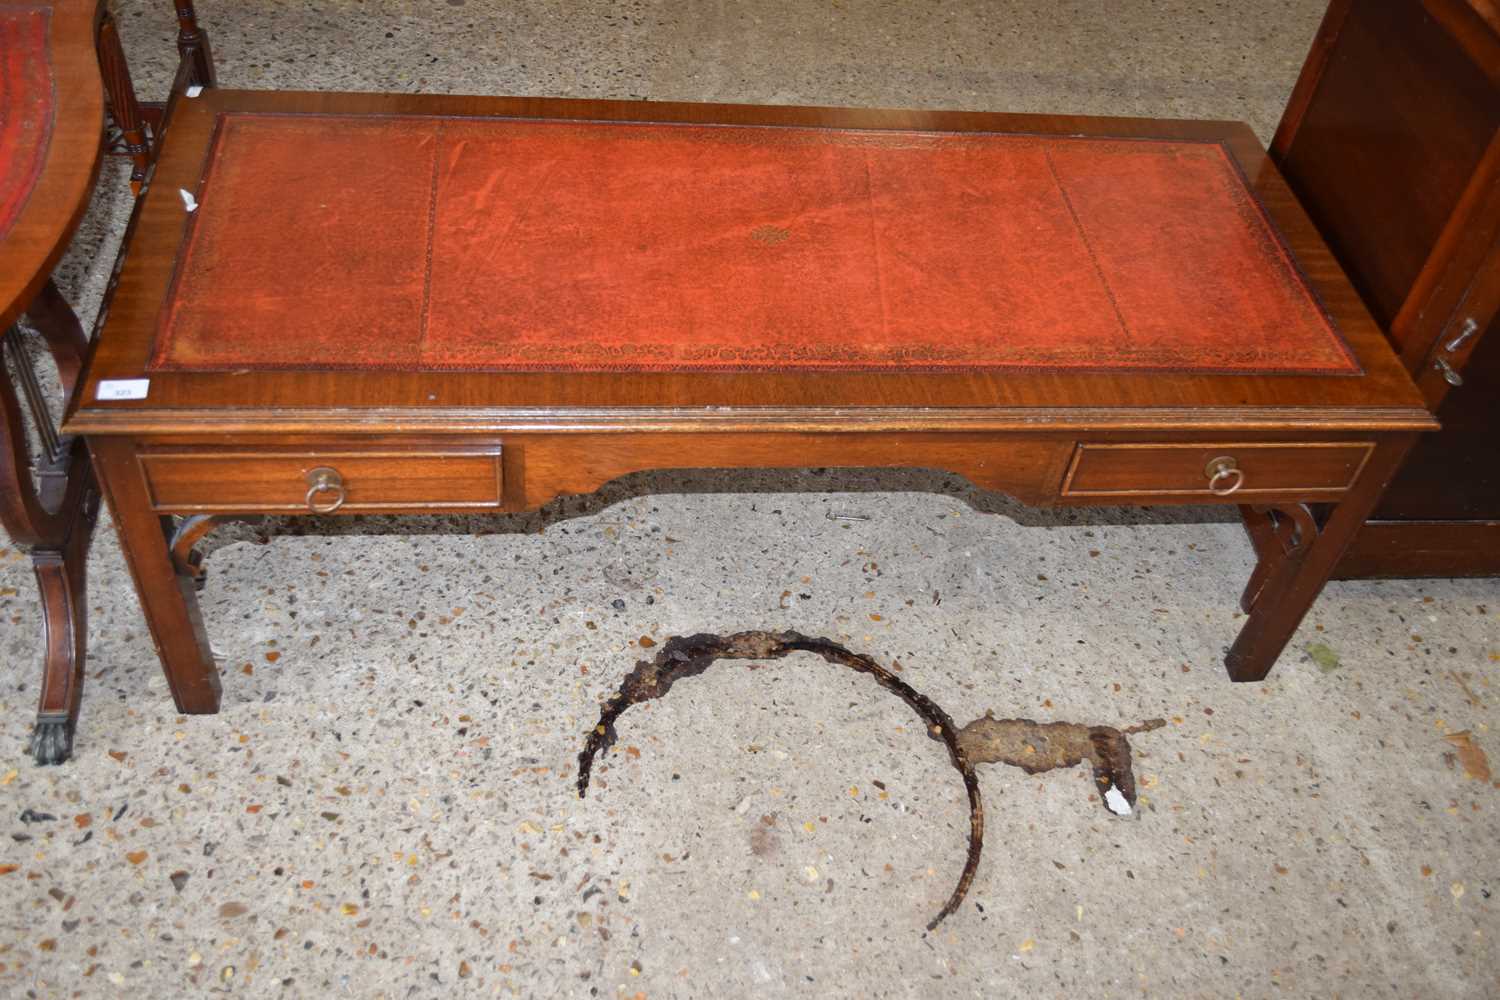 REPRODUCTION MAHOGANY VENEERED COFFEE TABLE WITH RED LEATHER INSET TOP, 123CM WIDE